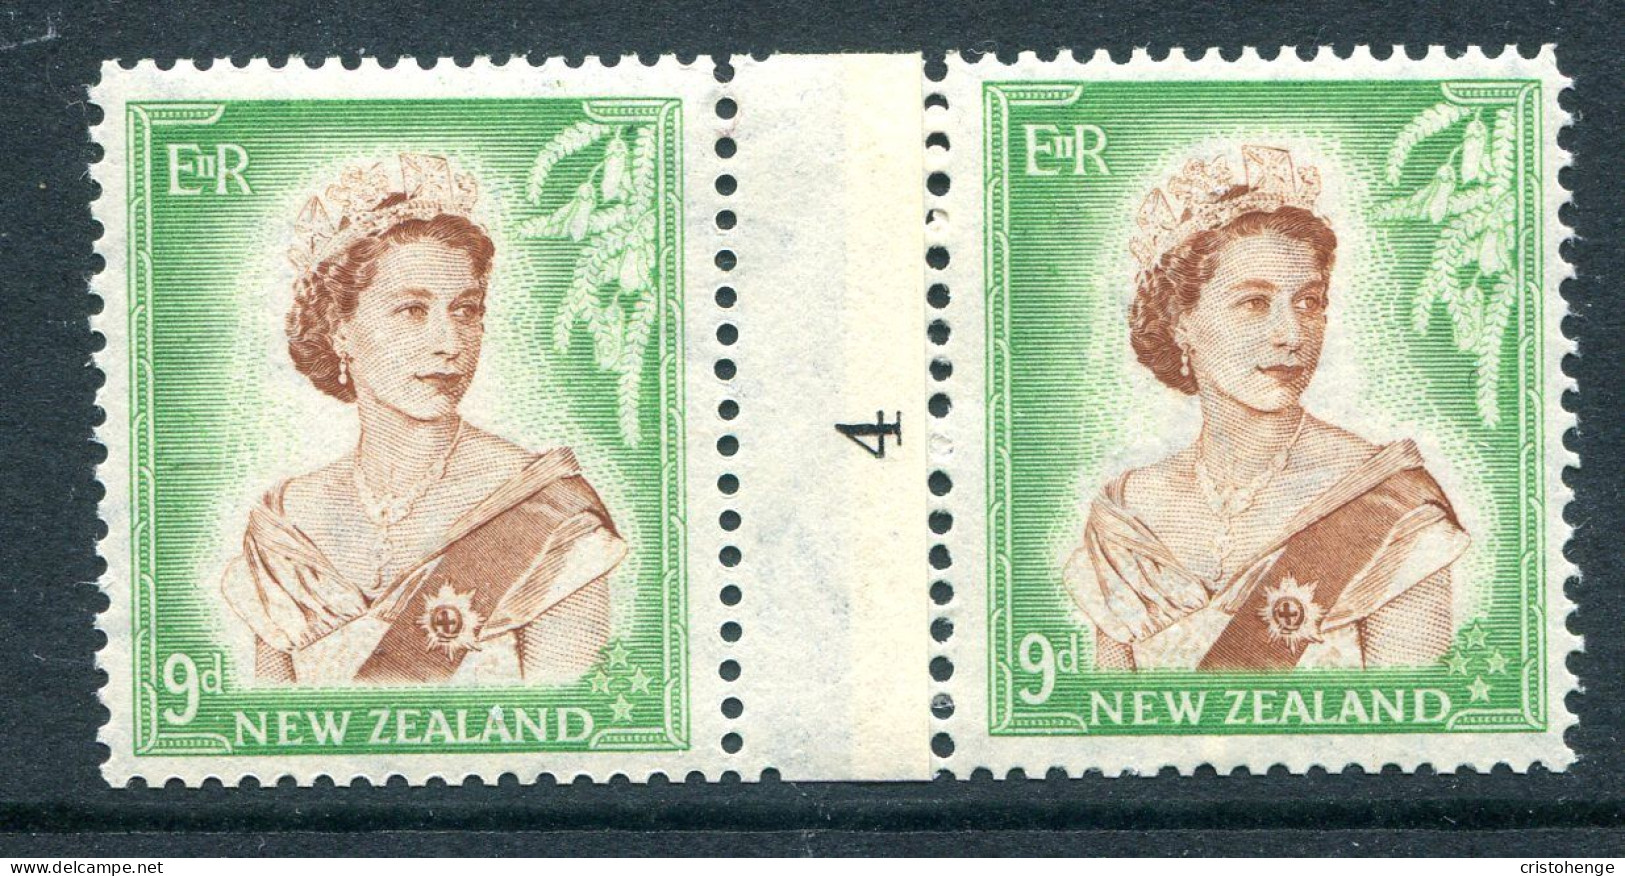 New Zealand 1953-59 QEII Definitives - Coil Pairs - 9d Brown & Green - Horizontal - No. 4 - LHM - Neufs